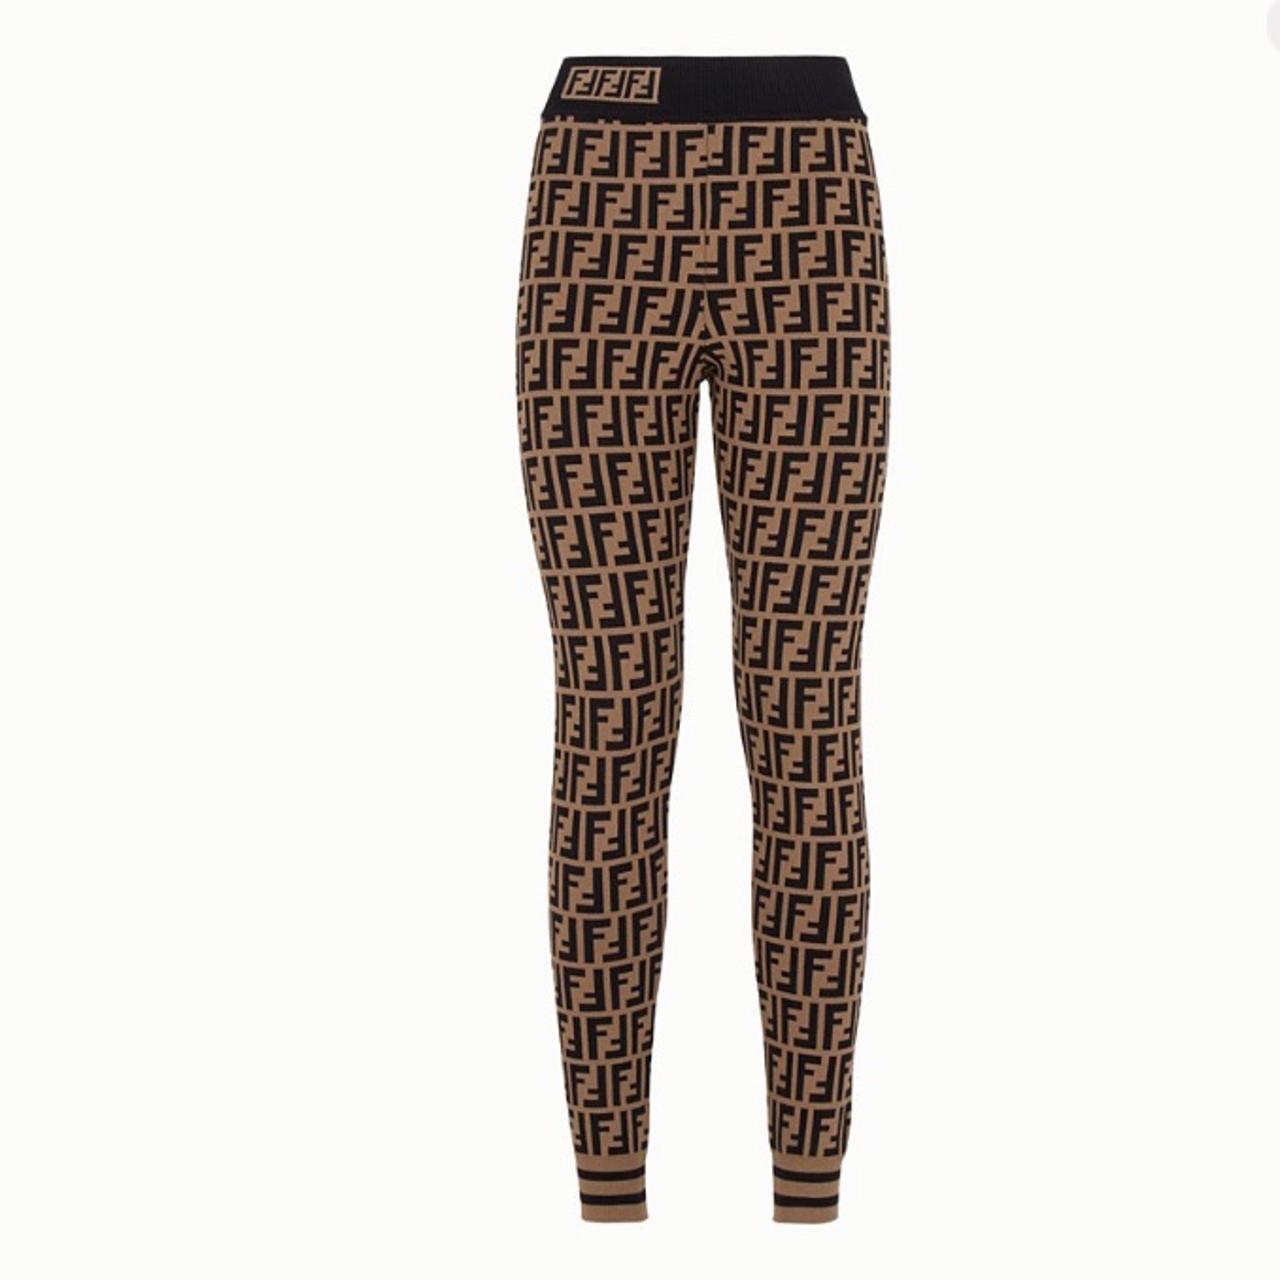 Looking for a pair of authentic Fendi leggings in